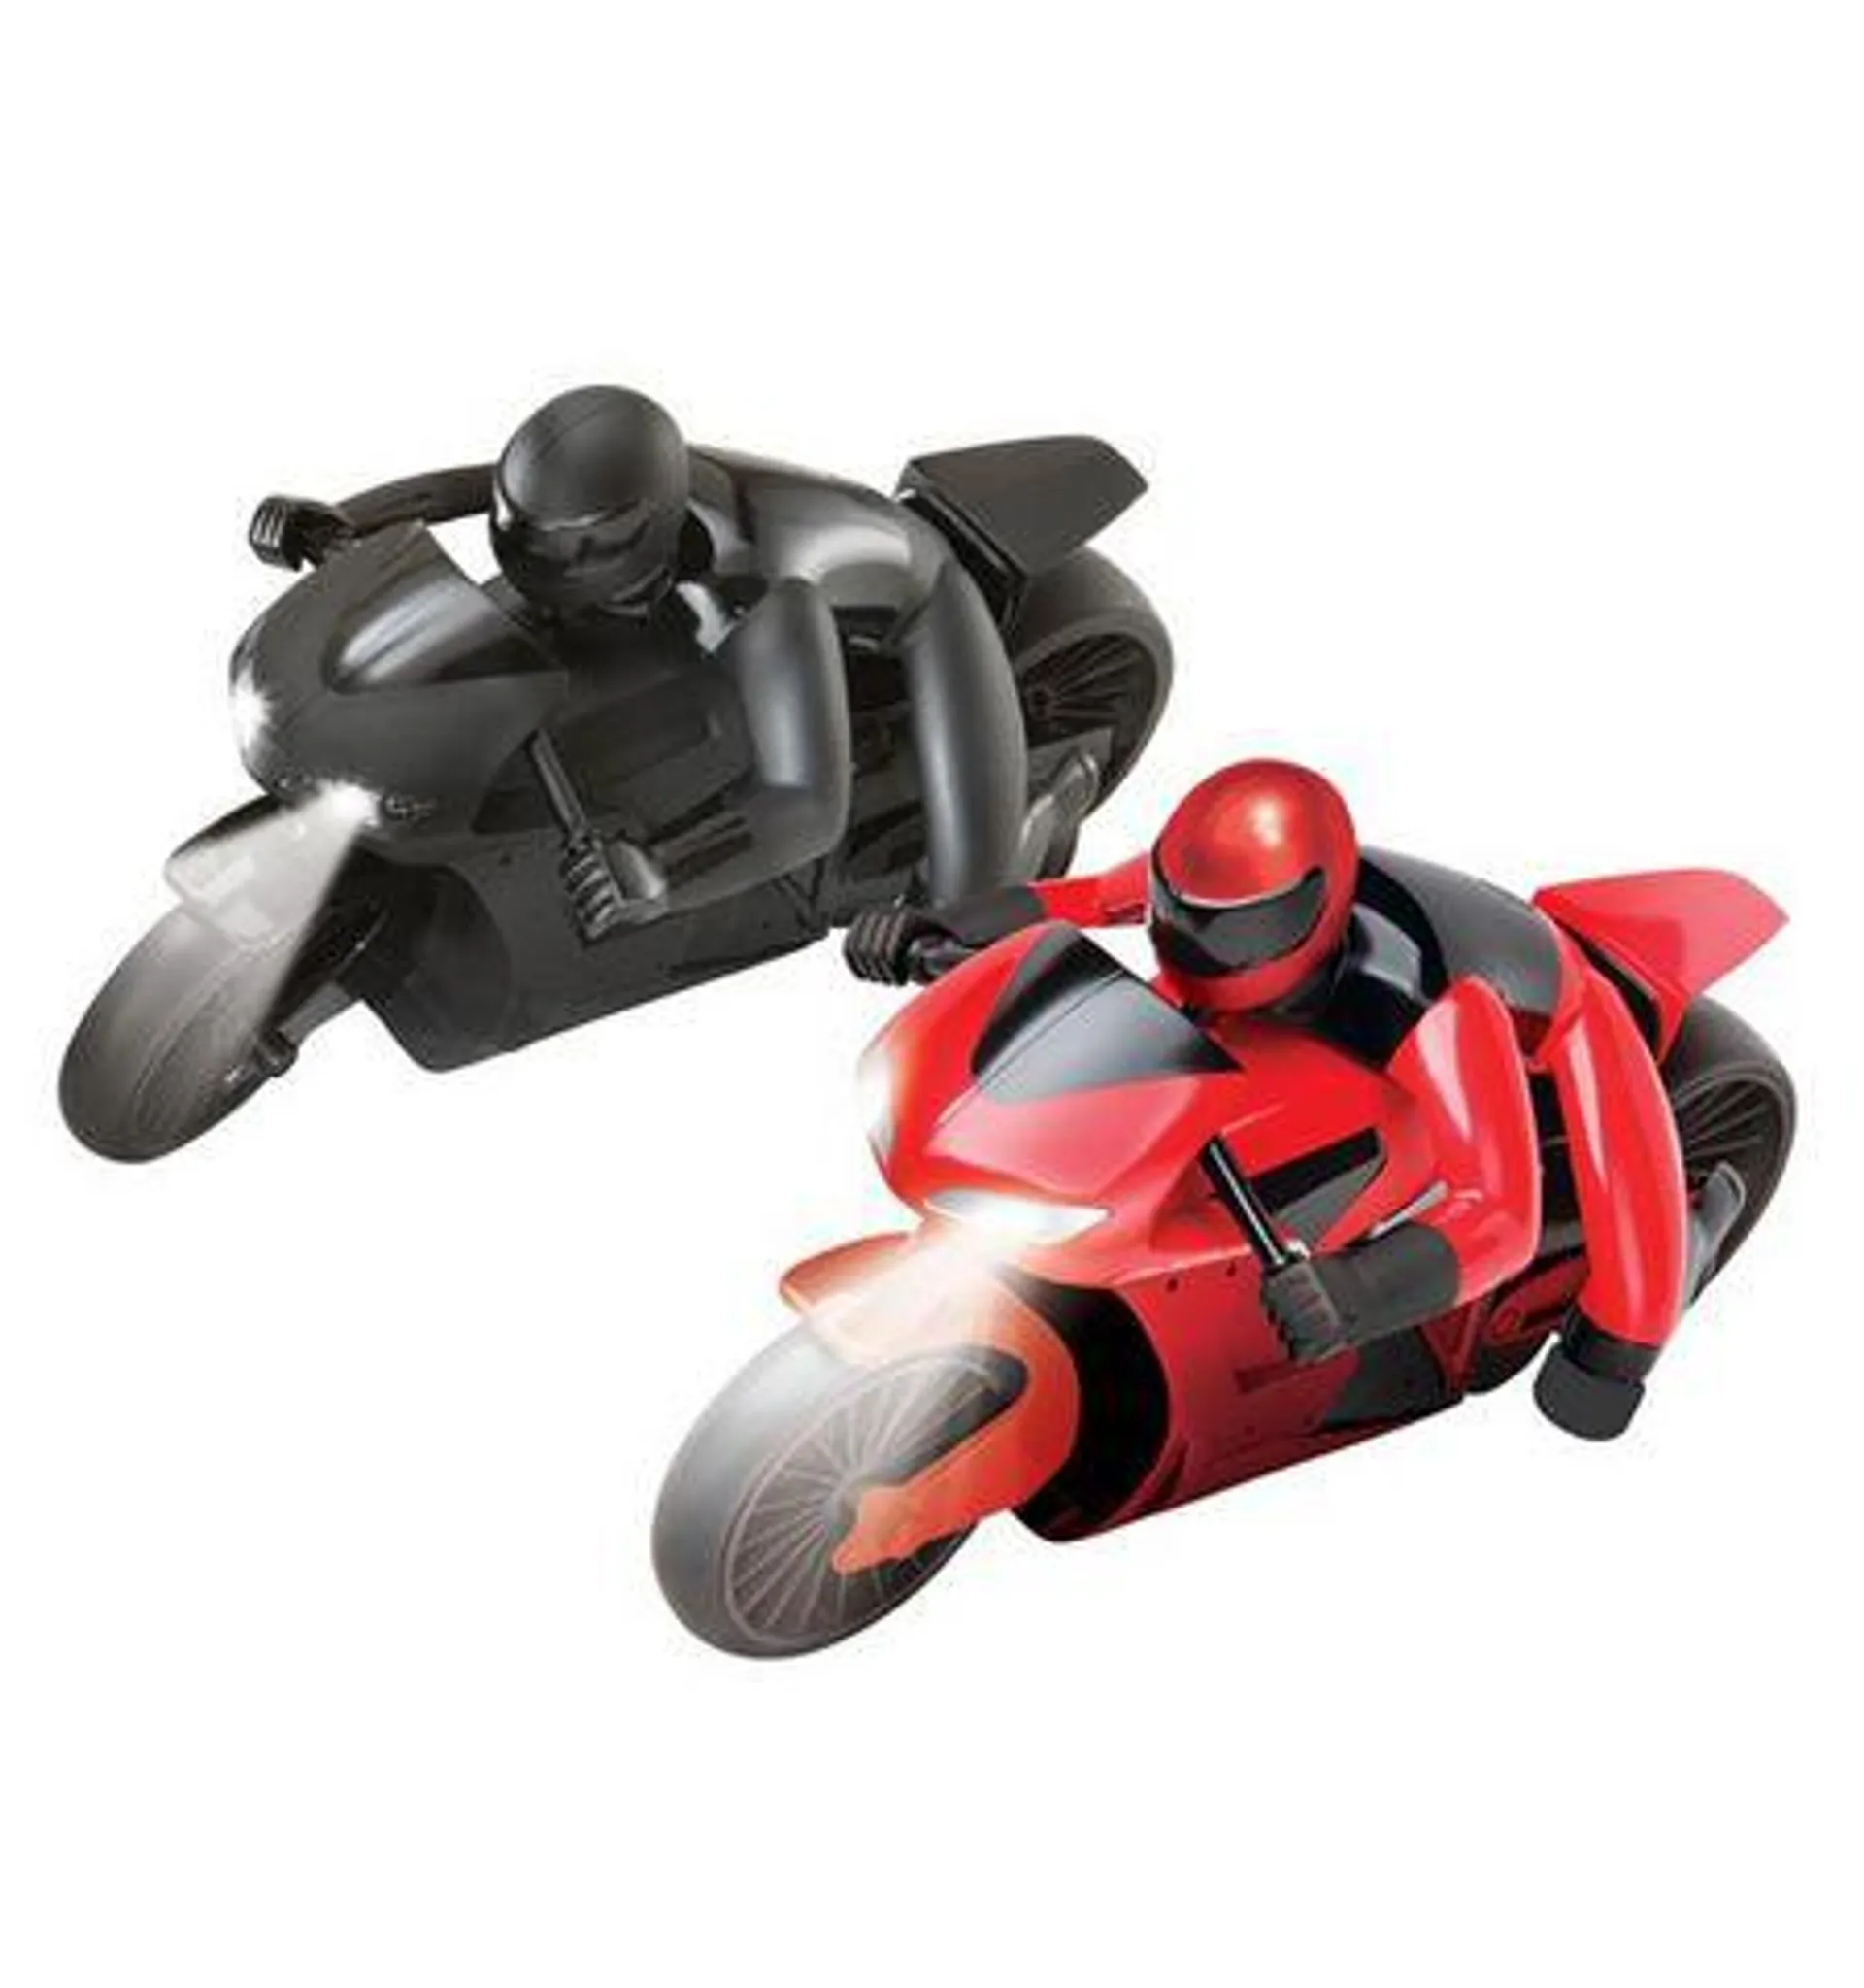 Blue Hat Remote Controlled Motorcycle